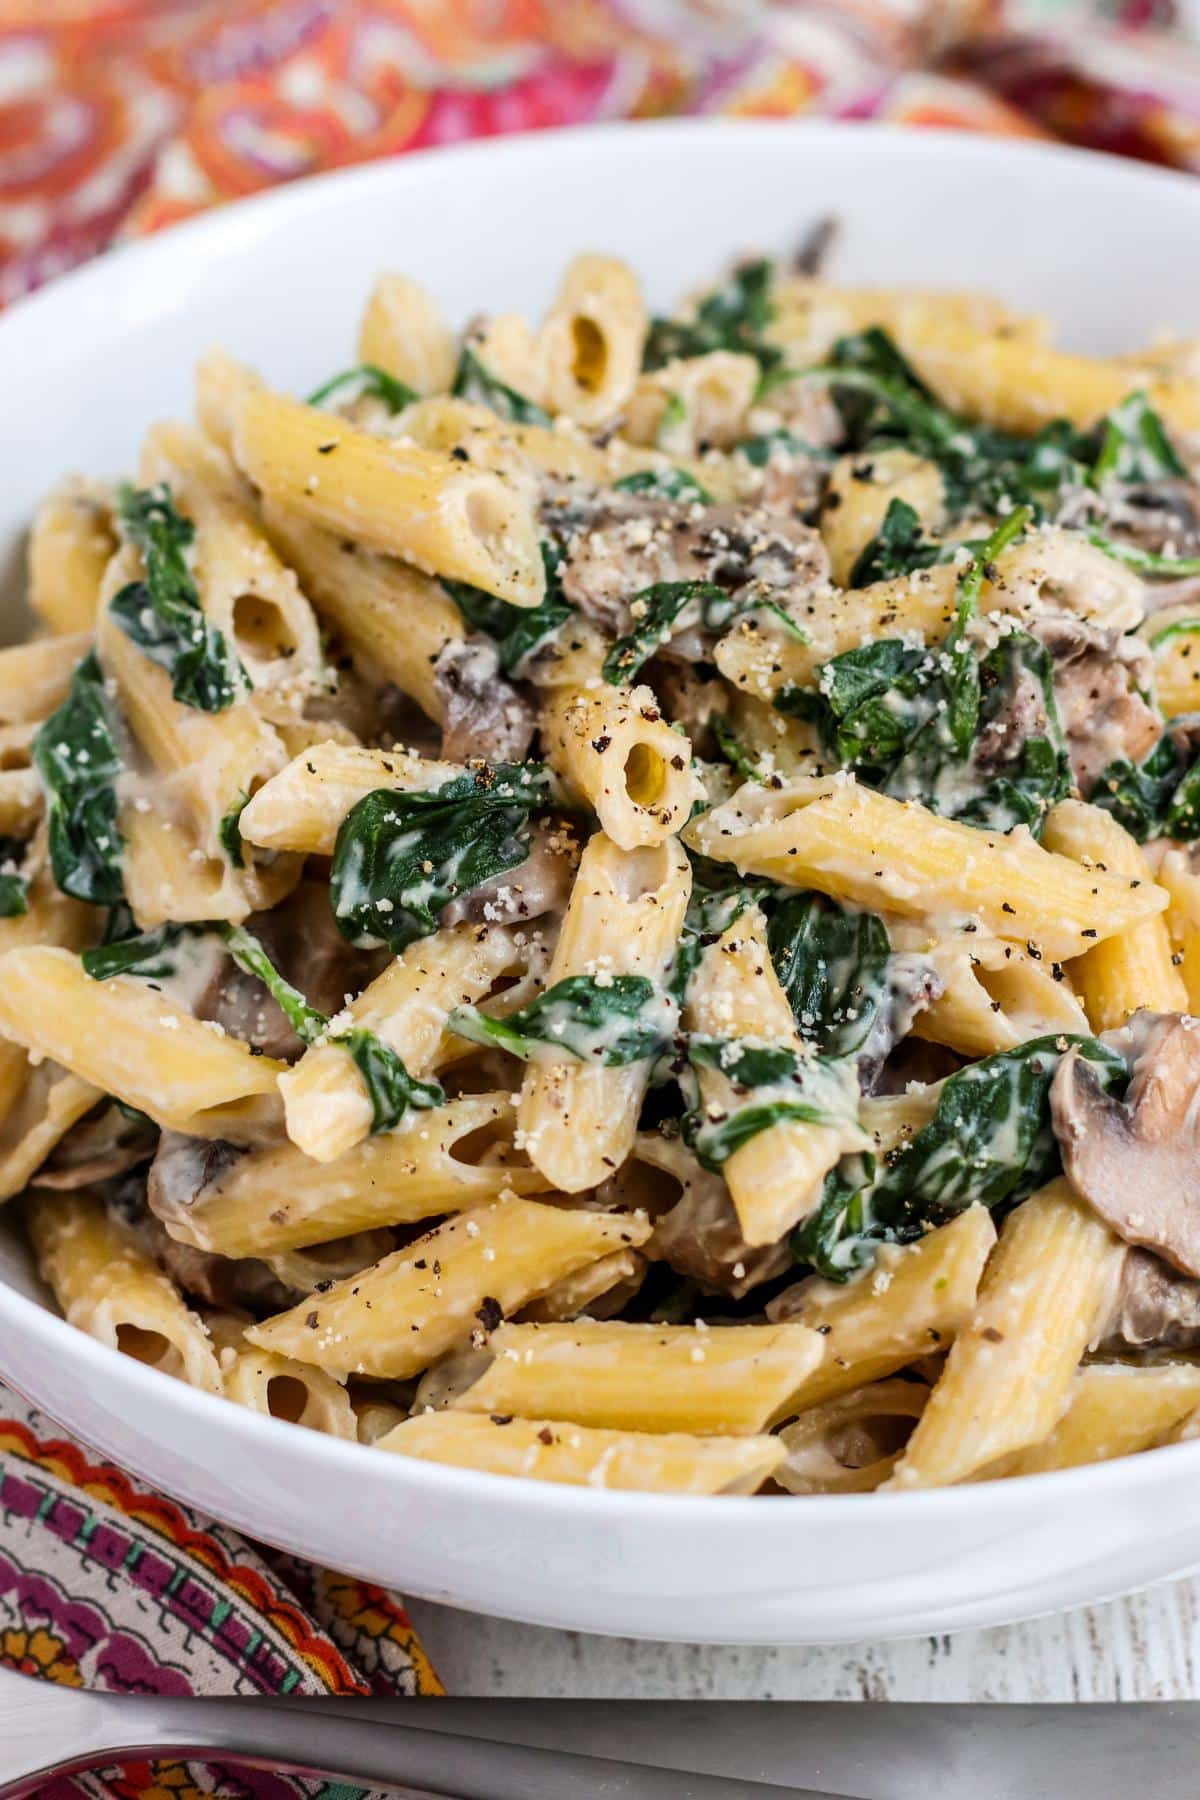 Bowl of penne in a creamy sauce with spinach and mushrooms.